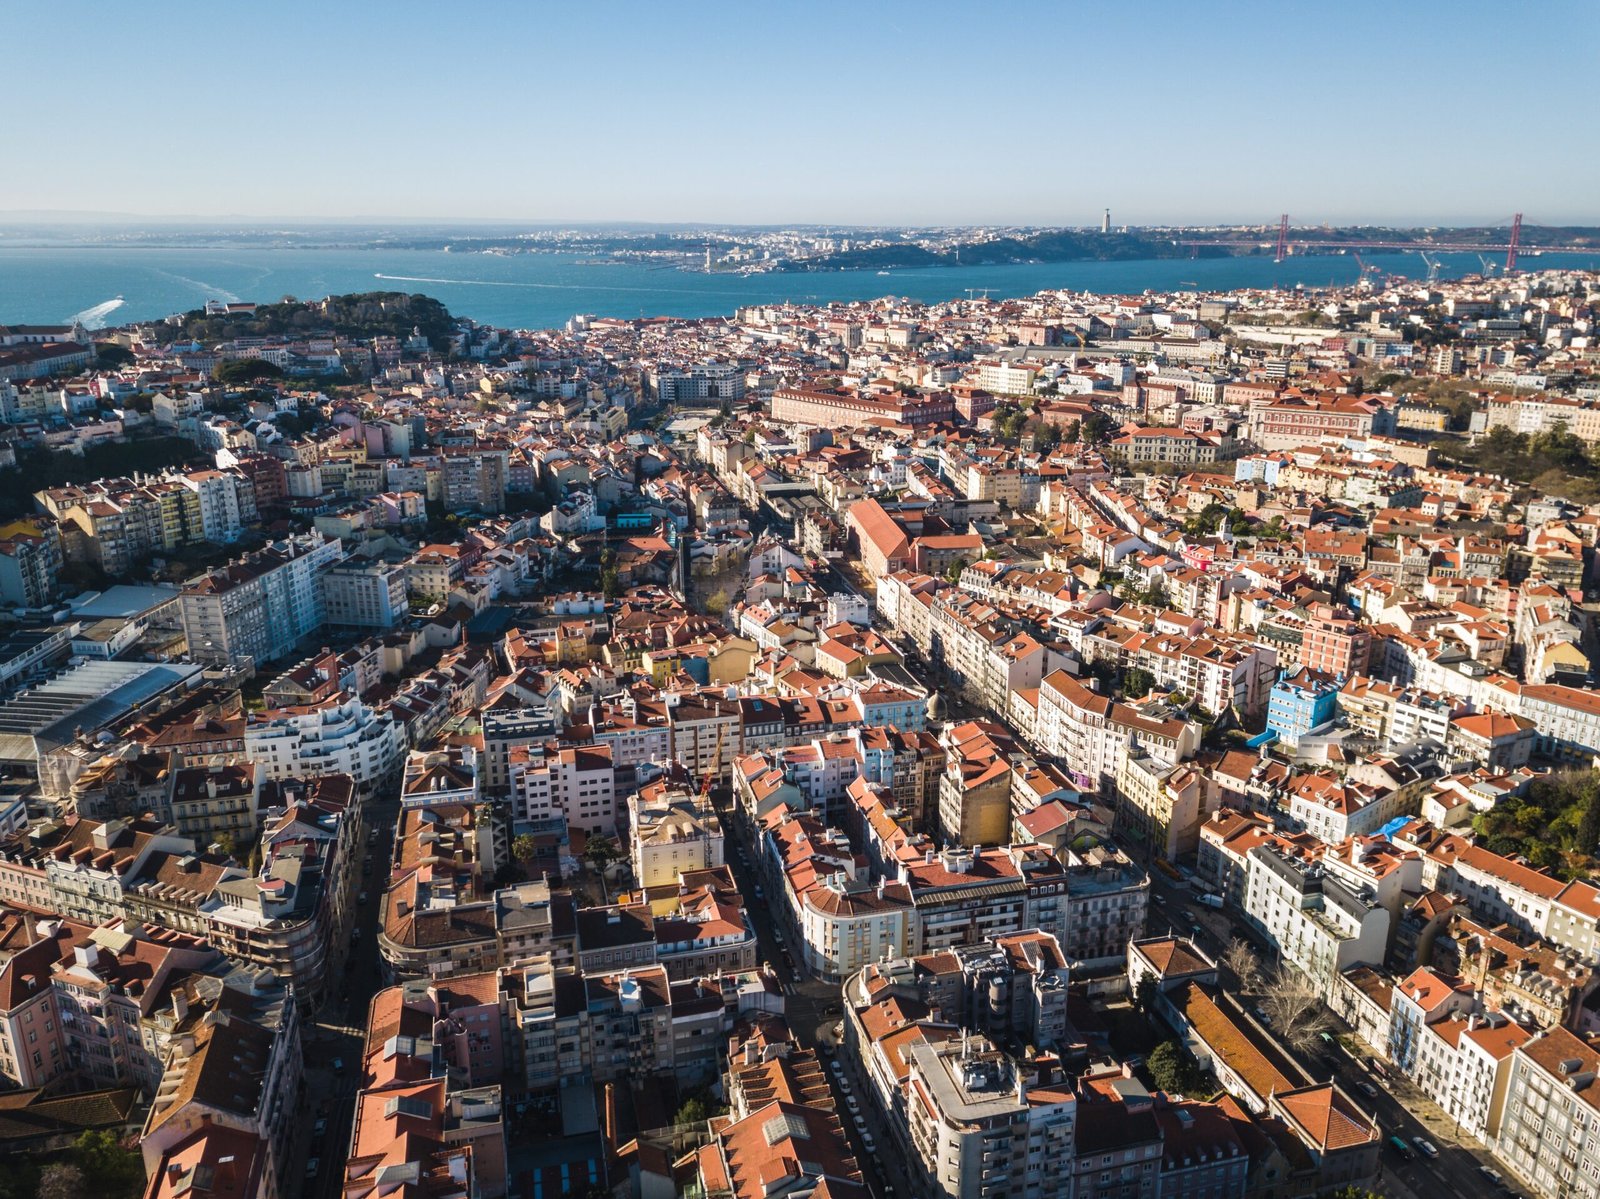 Second Largest City in Portugal